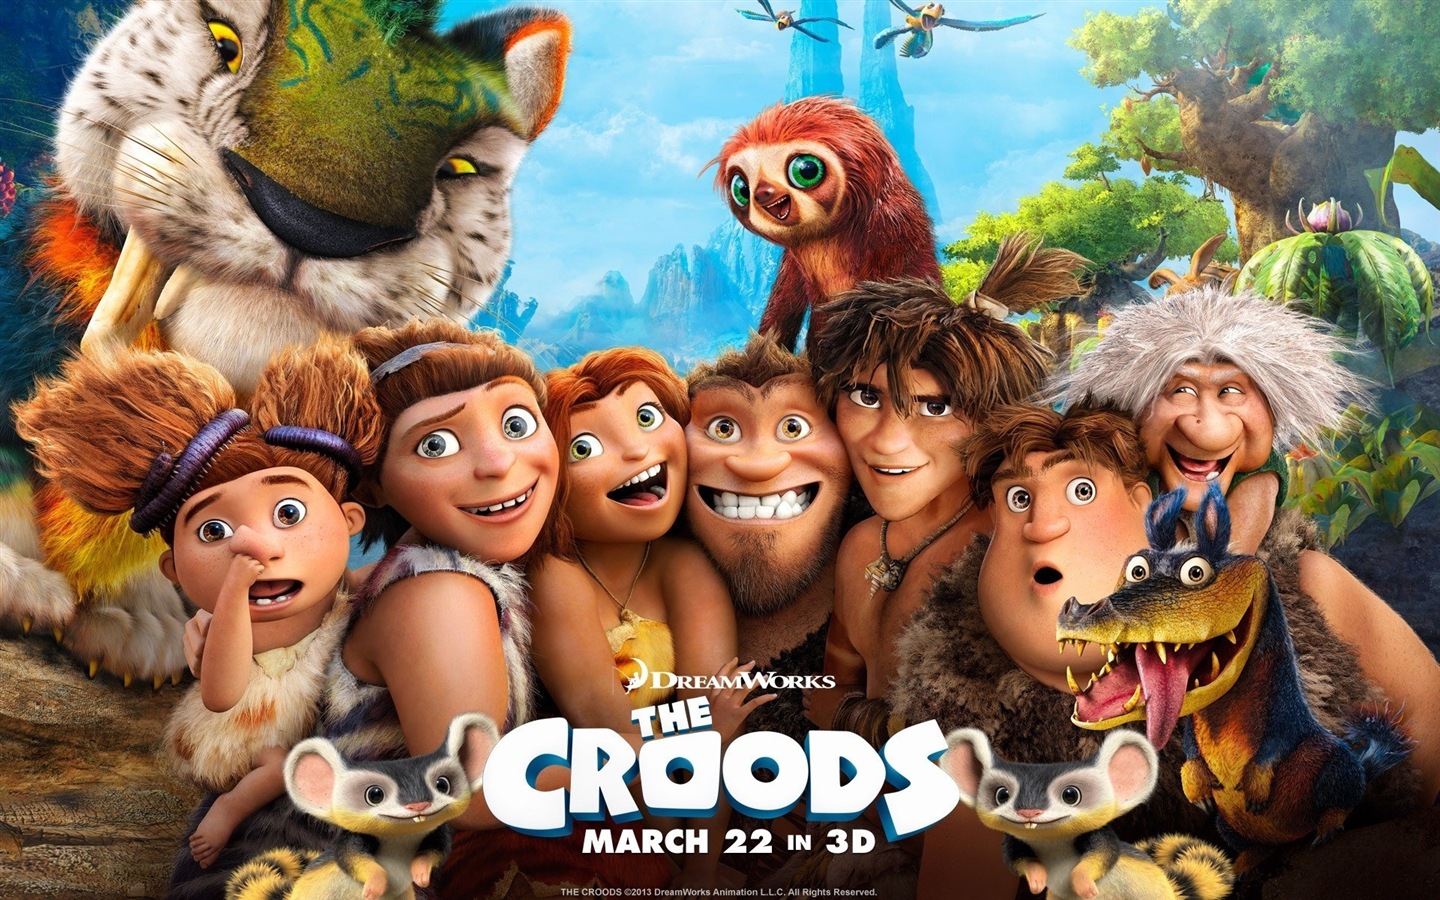 The Croods HD movie wallpapers #1 - 1440x900